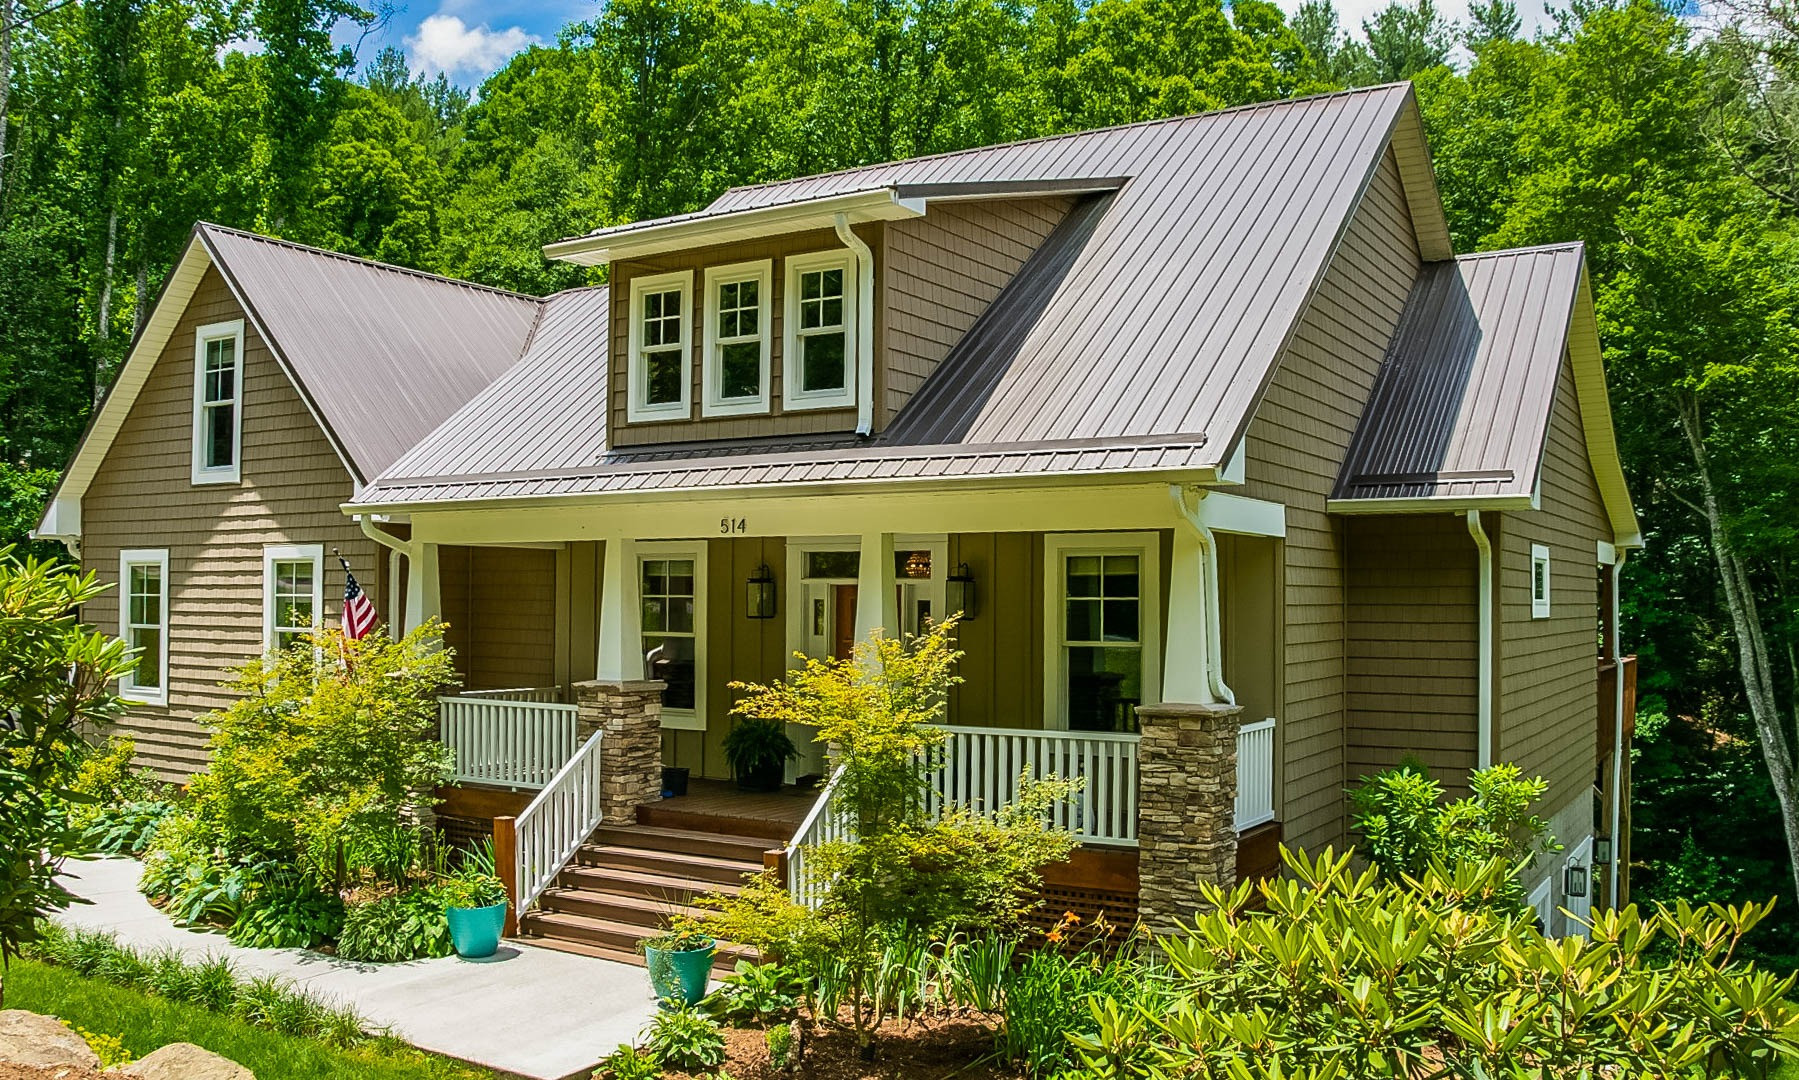 Designed and built with full-time living in mind, you will appreciate the low maintenance exterior including metal roof, high quality vinyl shakes and Hardie Plank board & batten siding and Trex decking.